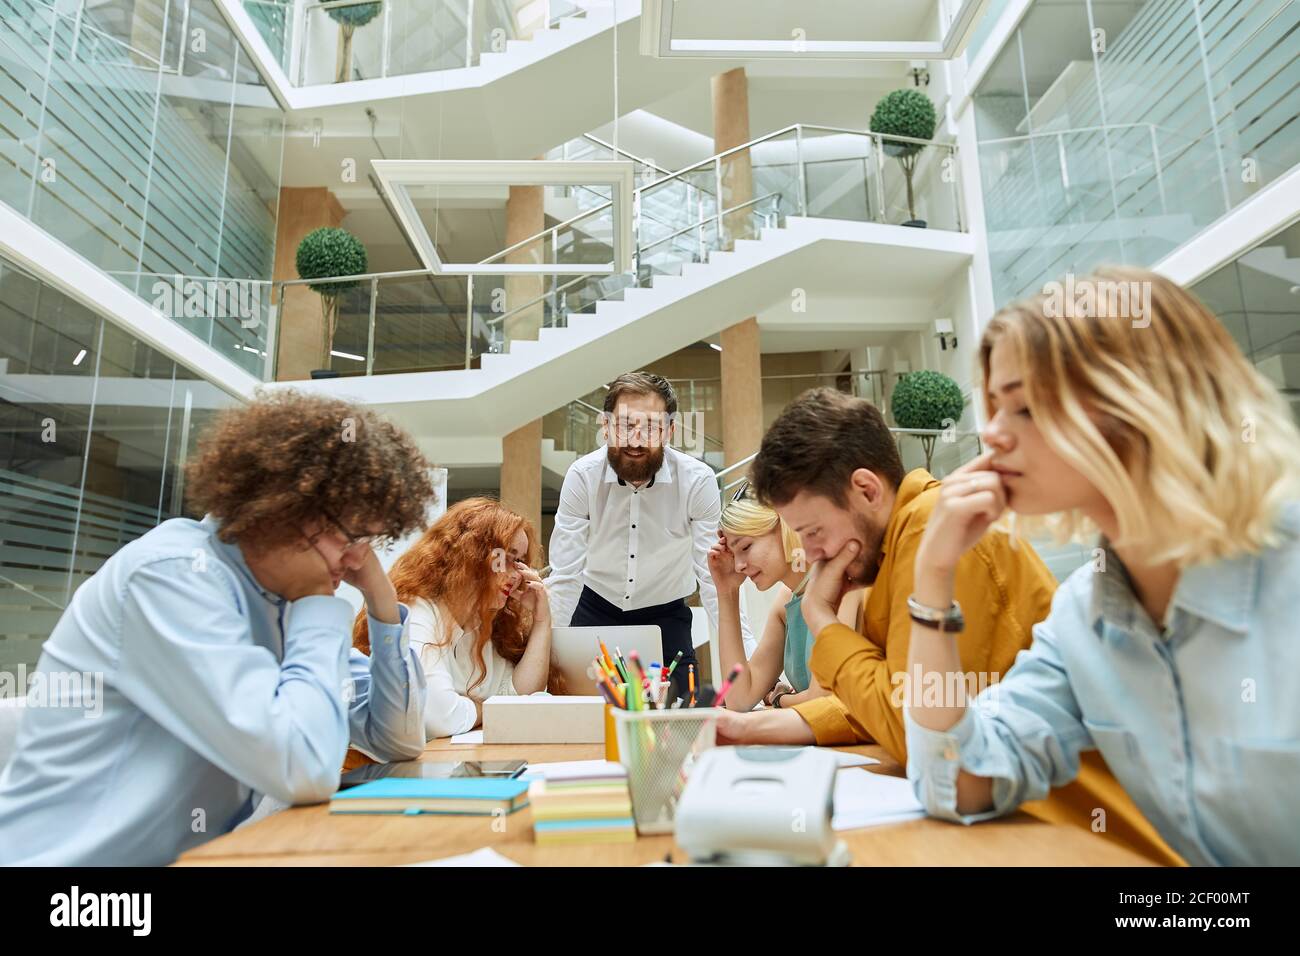 Elegant noble businessman with thick beard and round glasses, dressed in stylish white shirt leans on table, talks to smart employees with positive ex Stock Photo